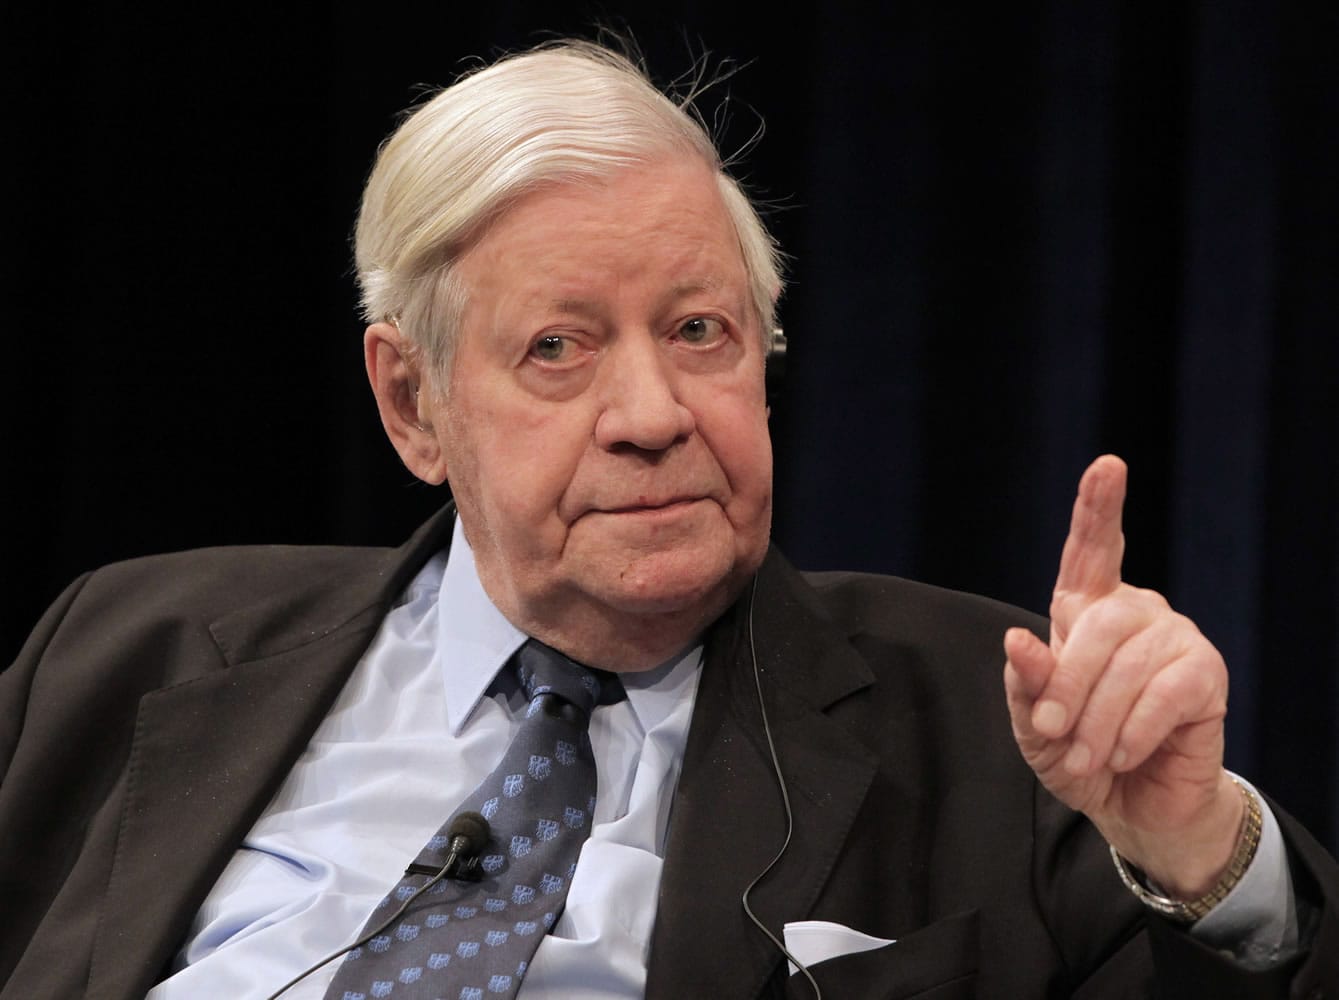 Former German Chancellor Helmut Schmidt makes a gesture during a 2009 discussion hosted by the ECB in Frankfurt, central Germany. Helmut Schmidt died Nov. 10, 2015. He was 96.